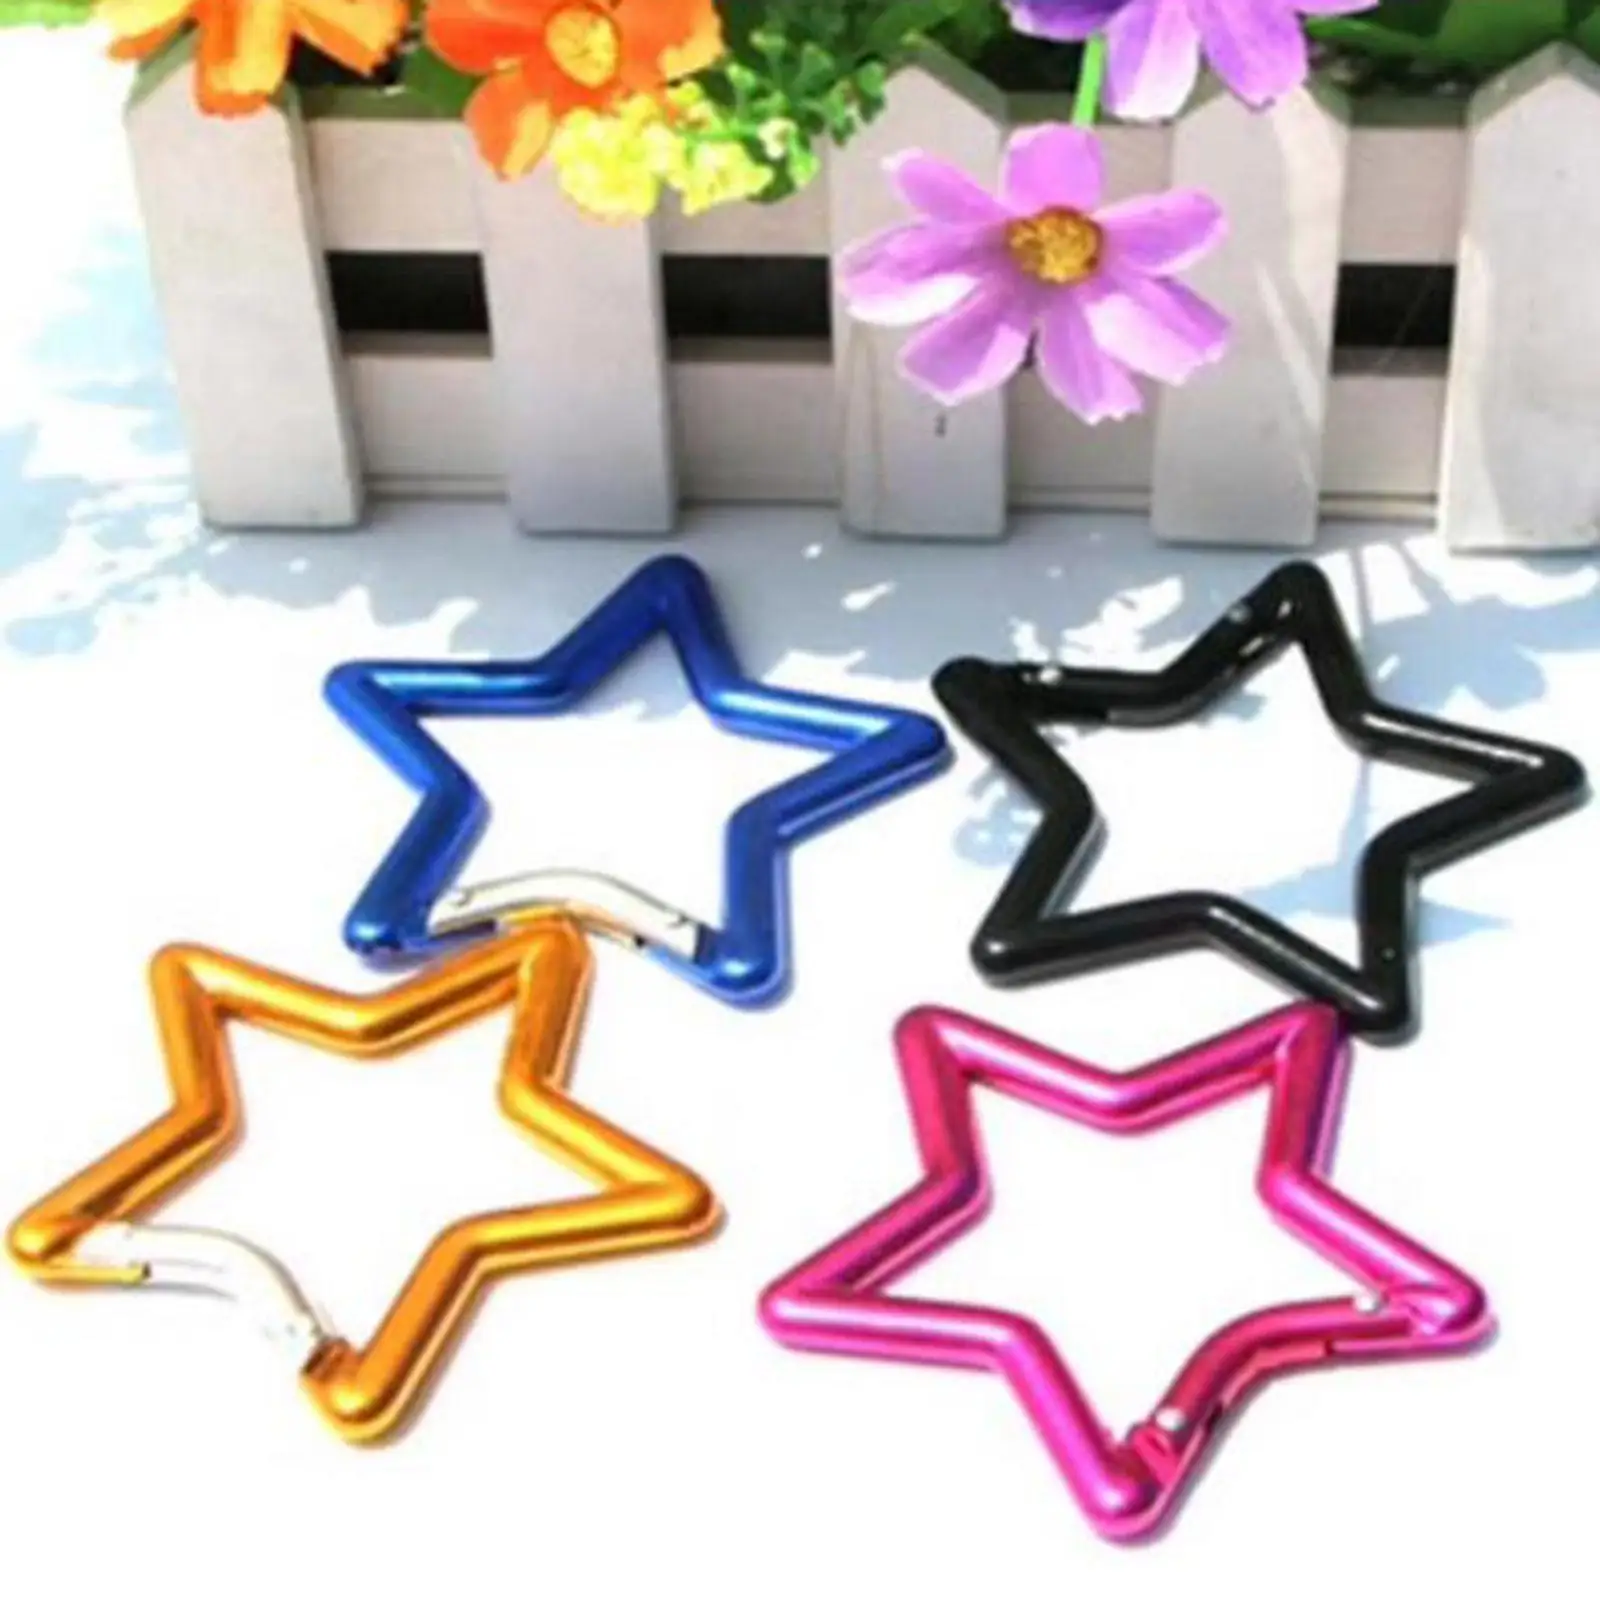 10x Five Pointed Star Shaped Carabiner Keyring Hook Heavy Duty Key Chain Clip for Fishing Hiking Traveling Camping Accessories 